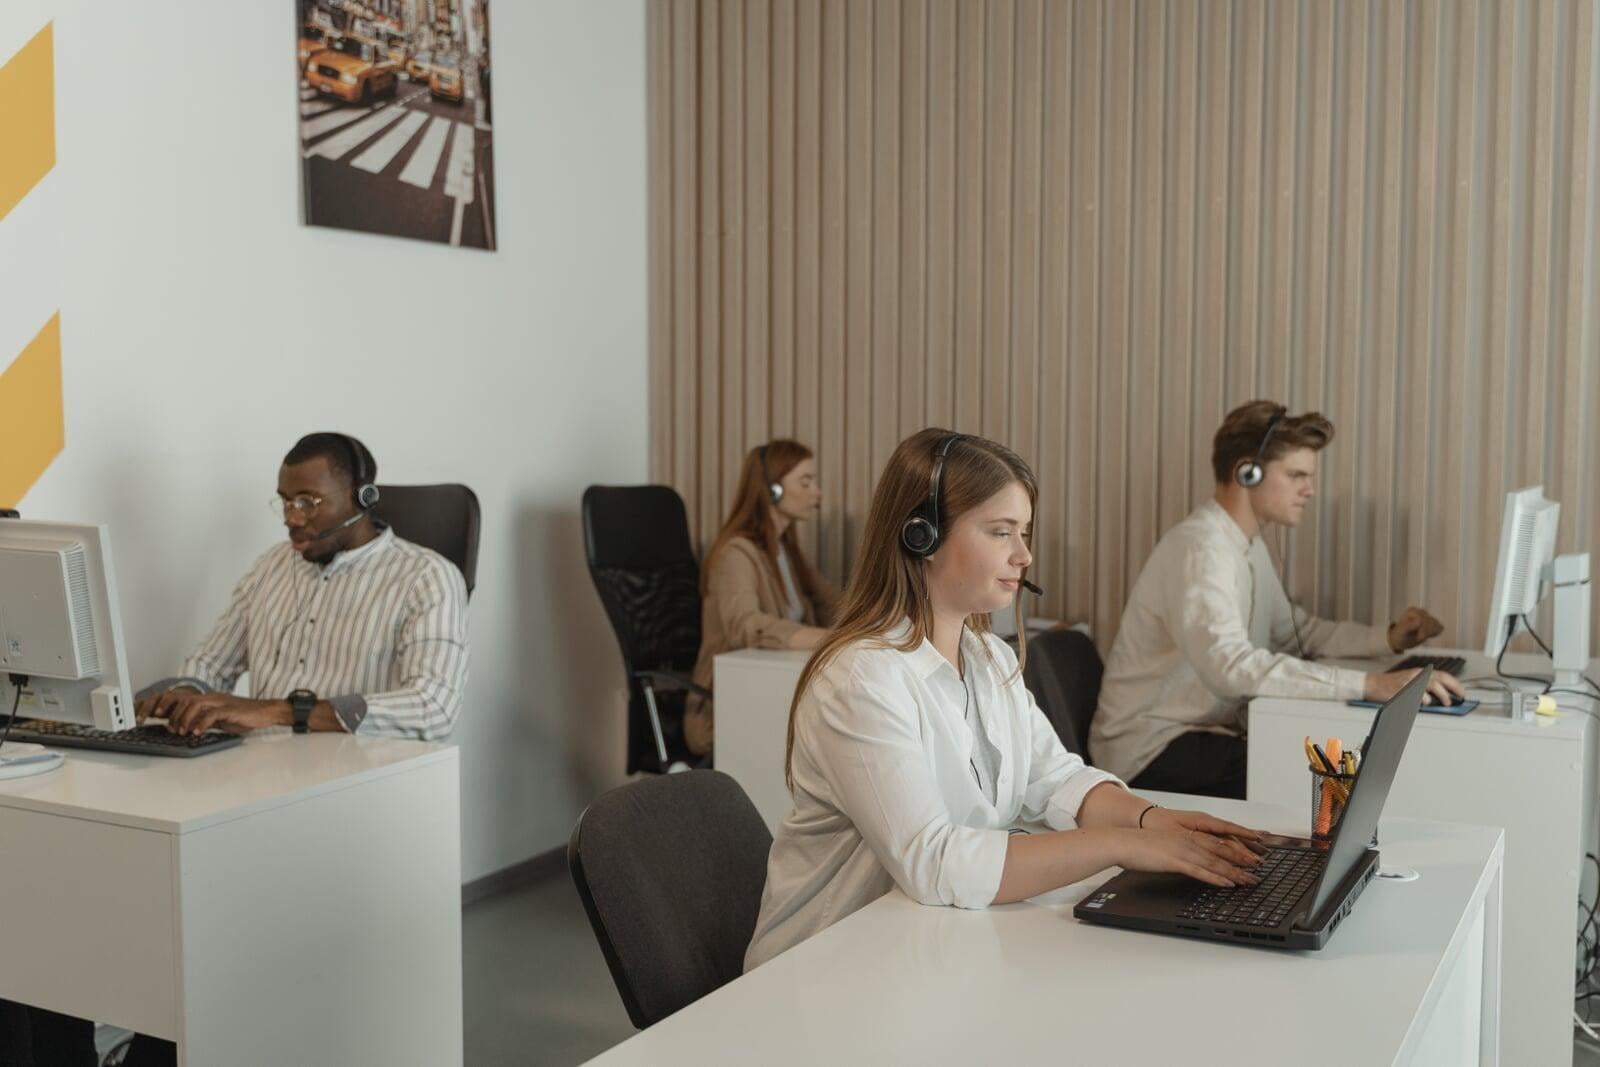 Employees Peforming Lead Management at Computer Stations